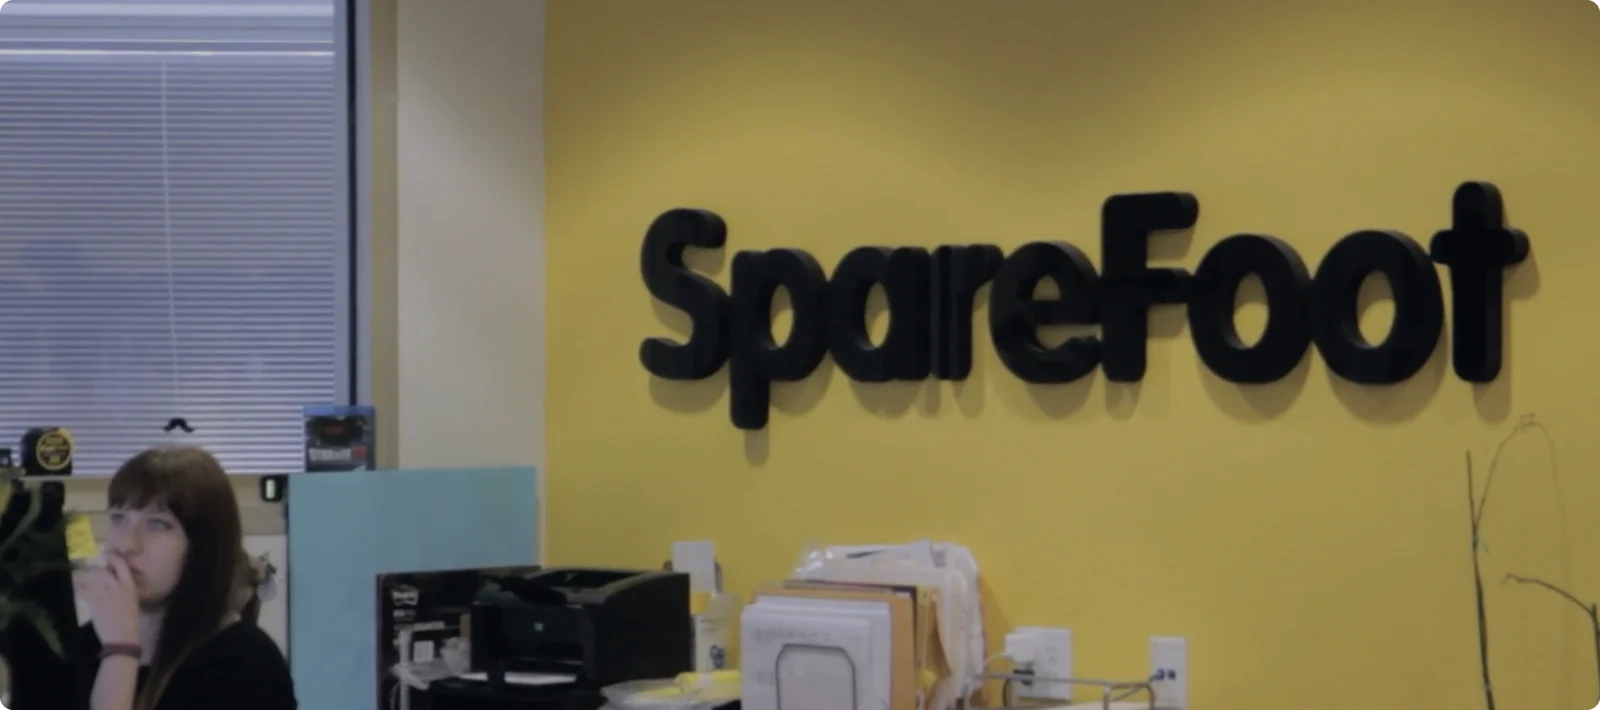 Sparefoot video placeholder